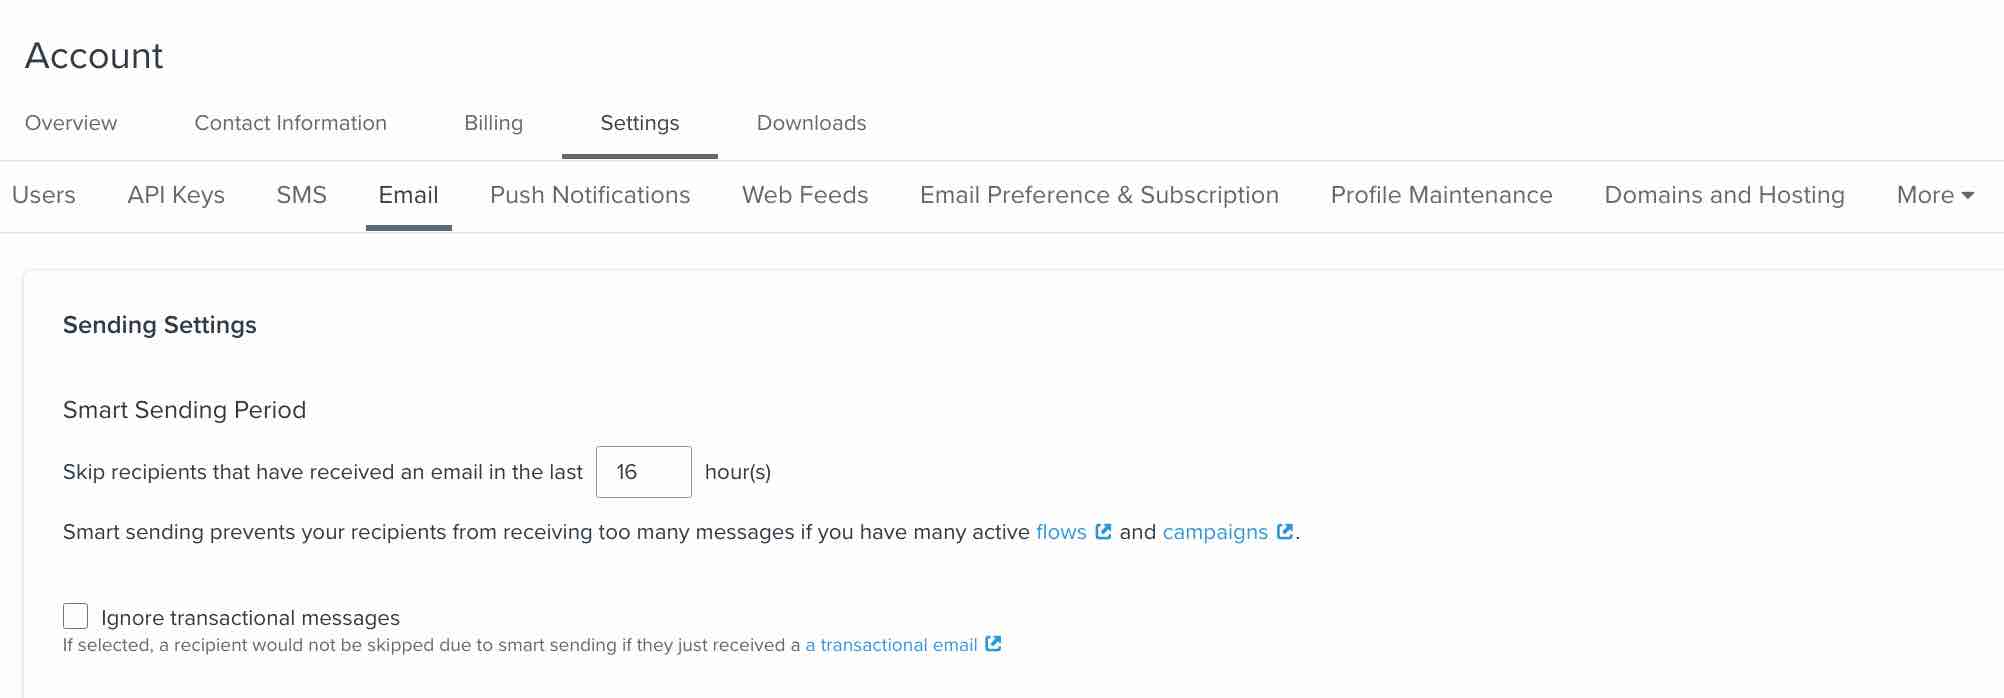 Smart Sending timeframe in the email settings page